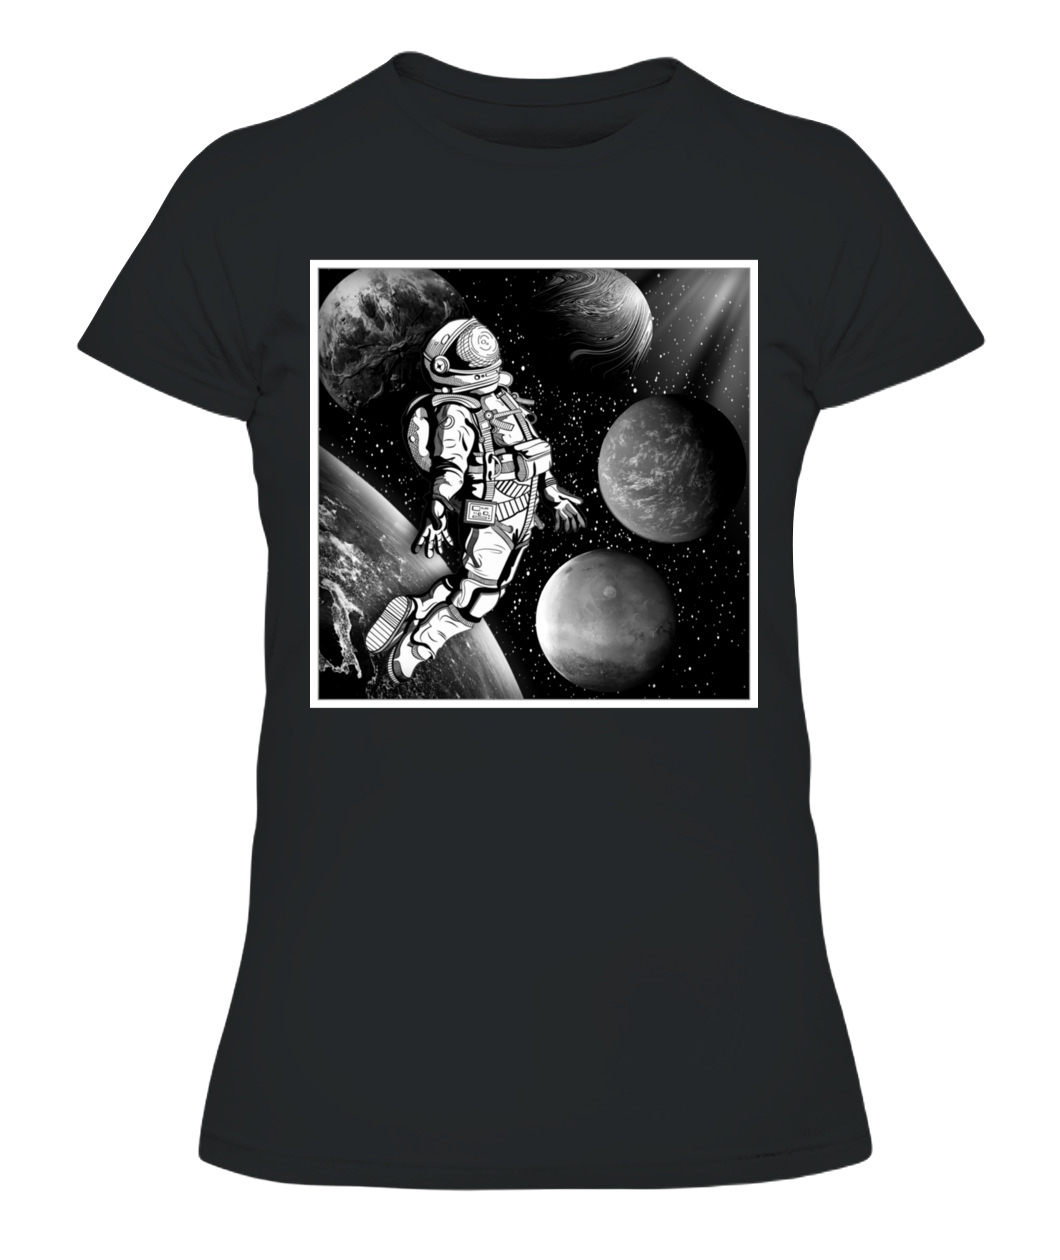 Woman's Space T-Shirt